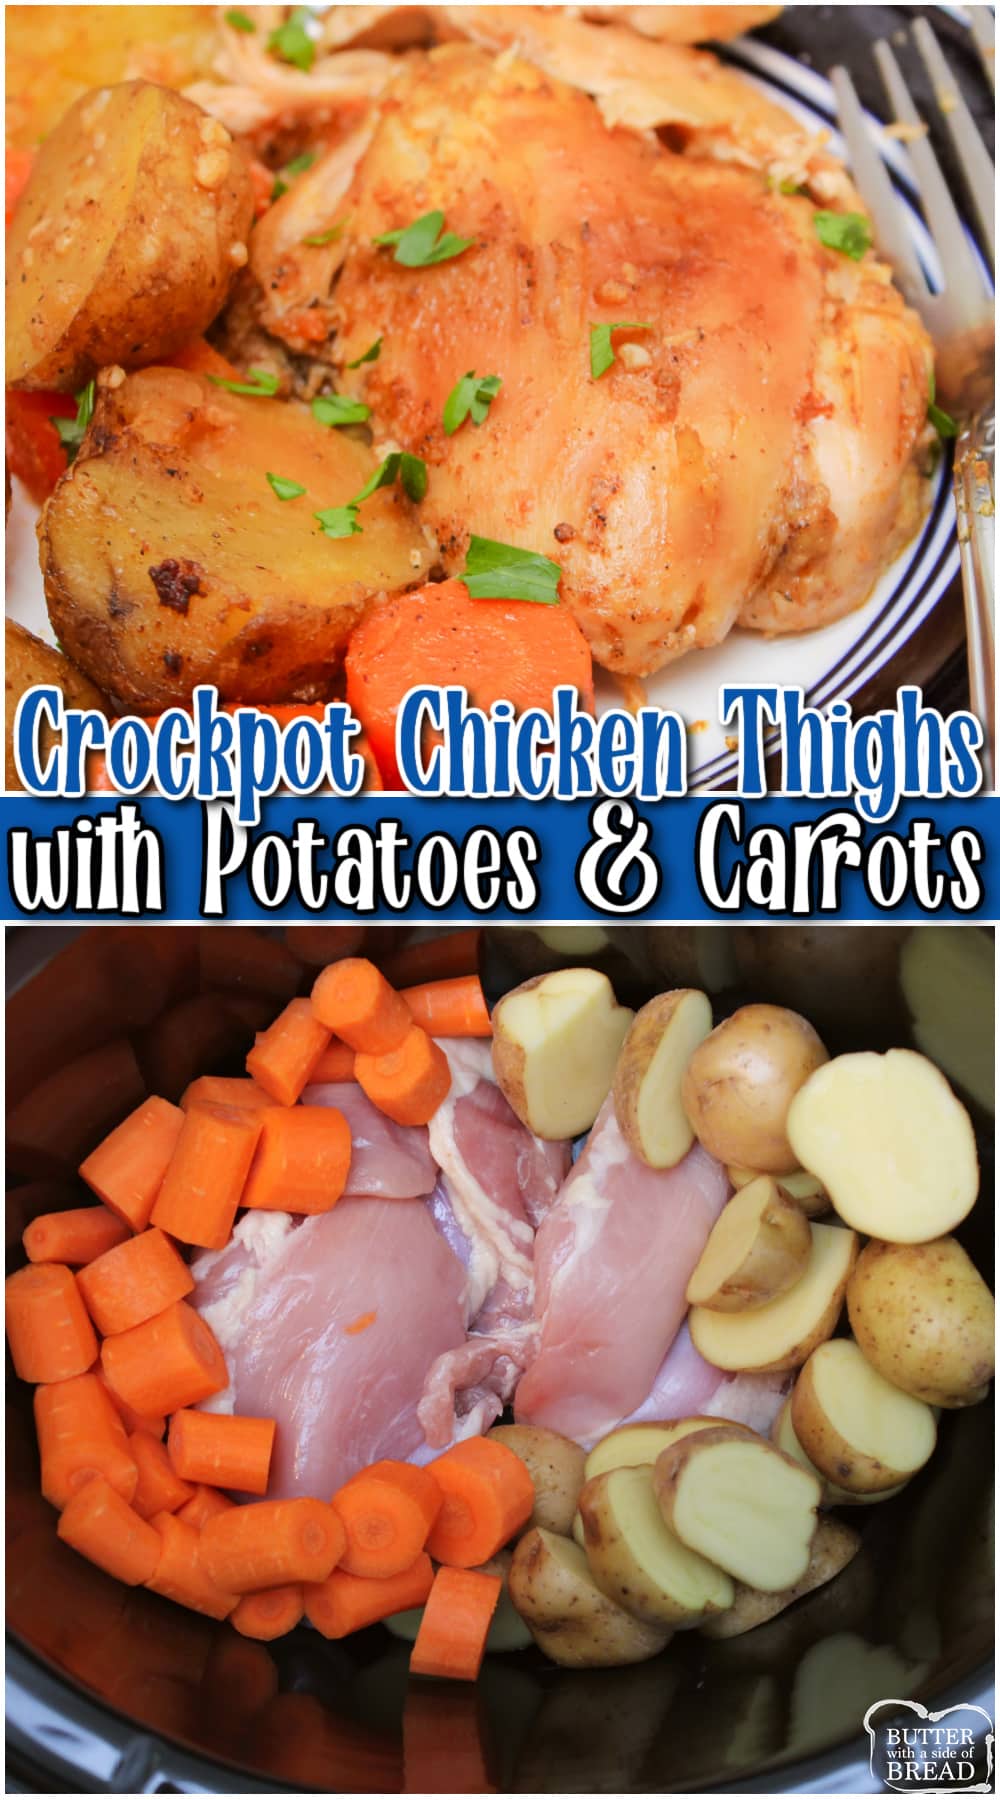 Crockpot Boneless Chicken Thighs are the perfect weeknight dinner! Tender, slow cooked chicken thigh recipe with creamy potatoes, carrots and a spice blend with amazing flavors!